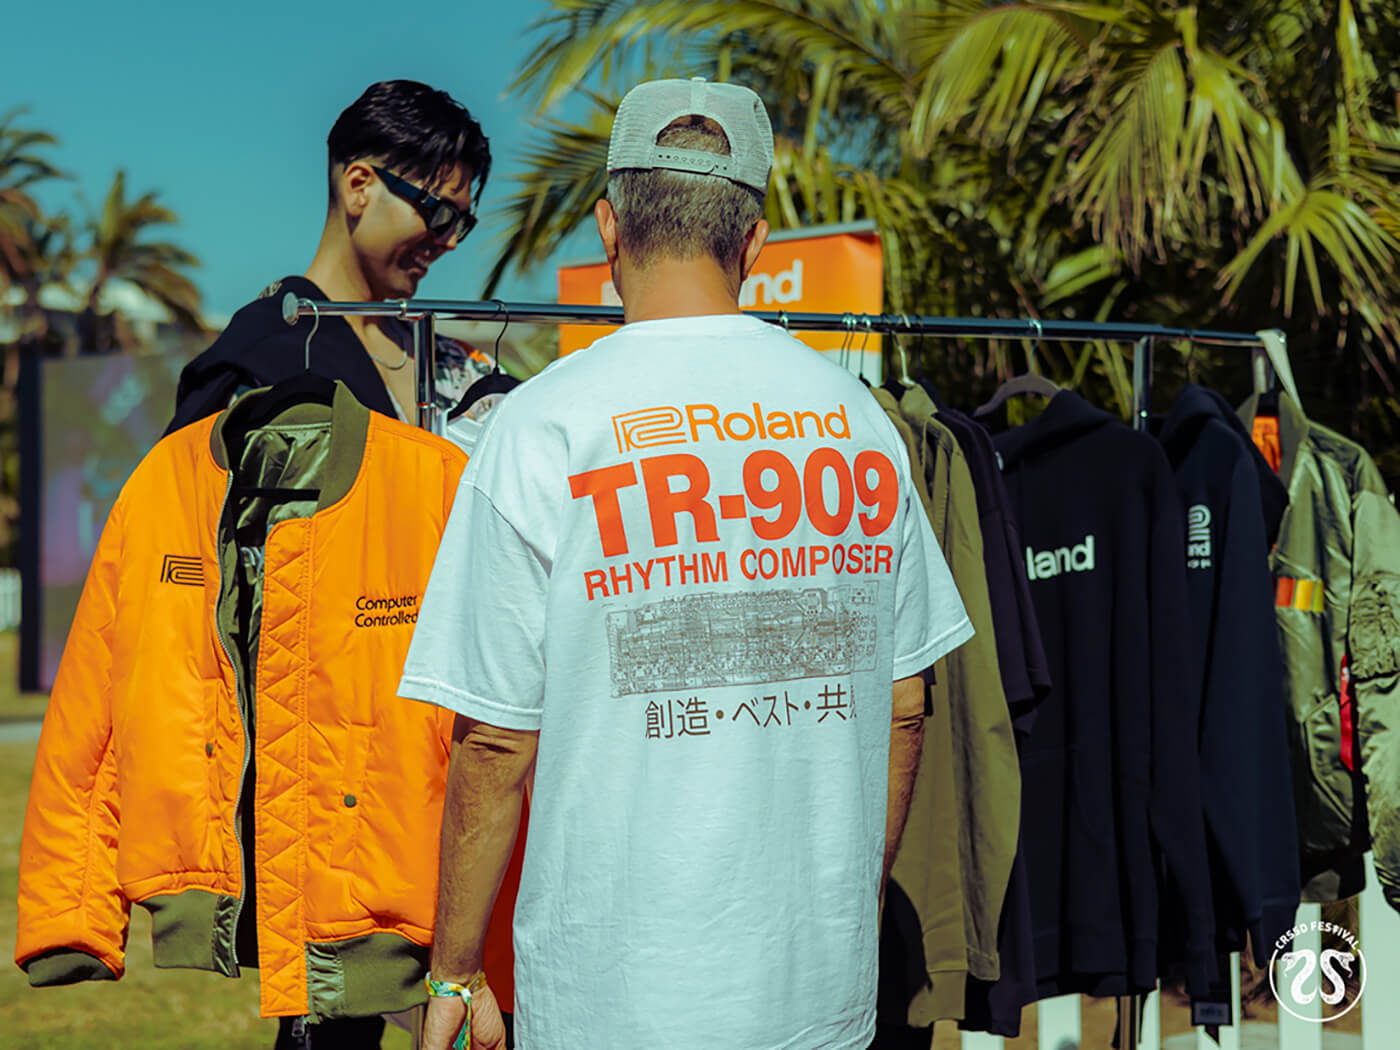 CRSSD Festival-goers checking out Roland merch at the booth, photo by Izzy Hassan